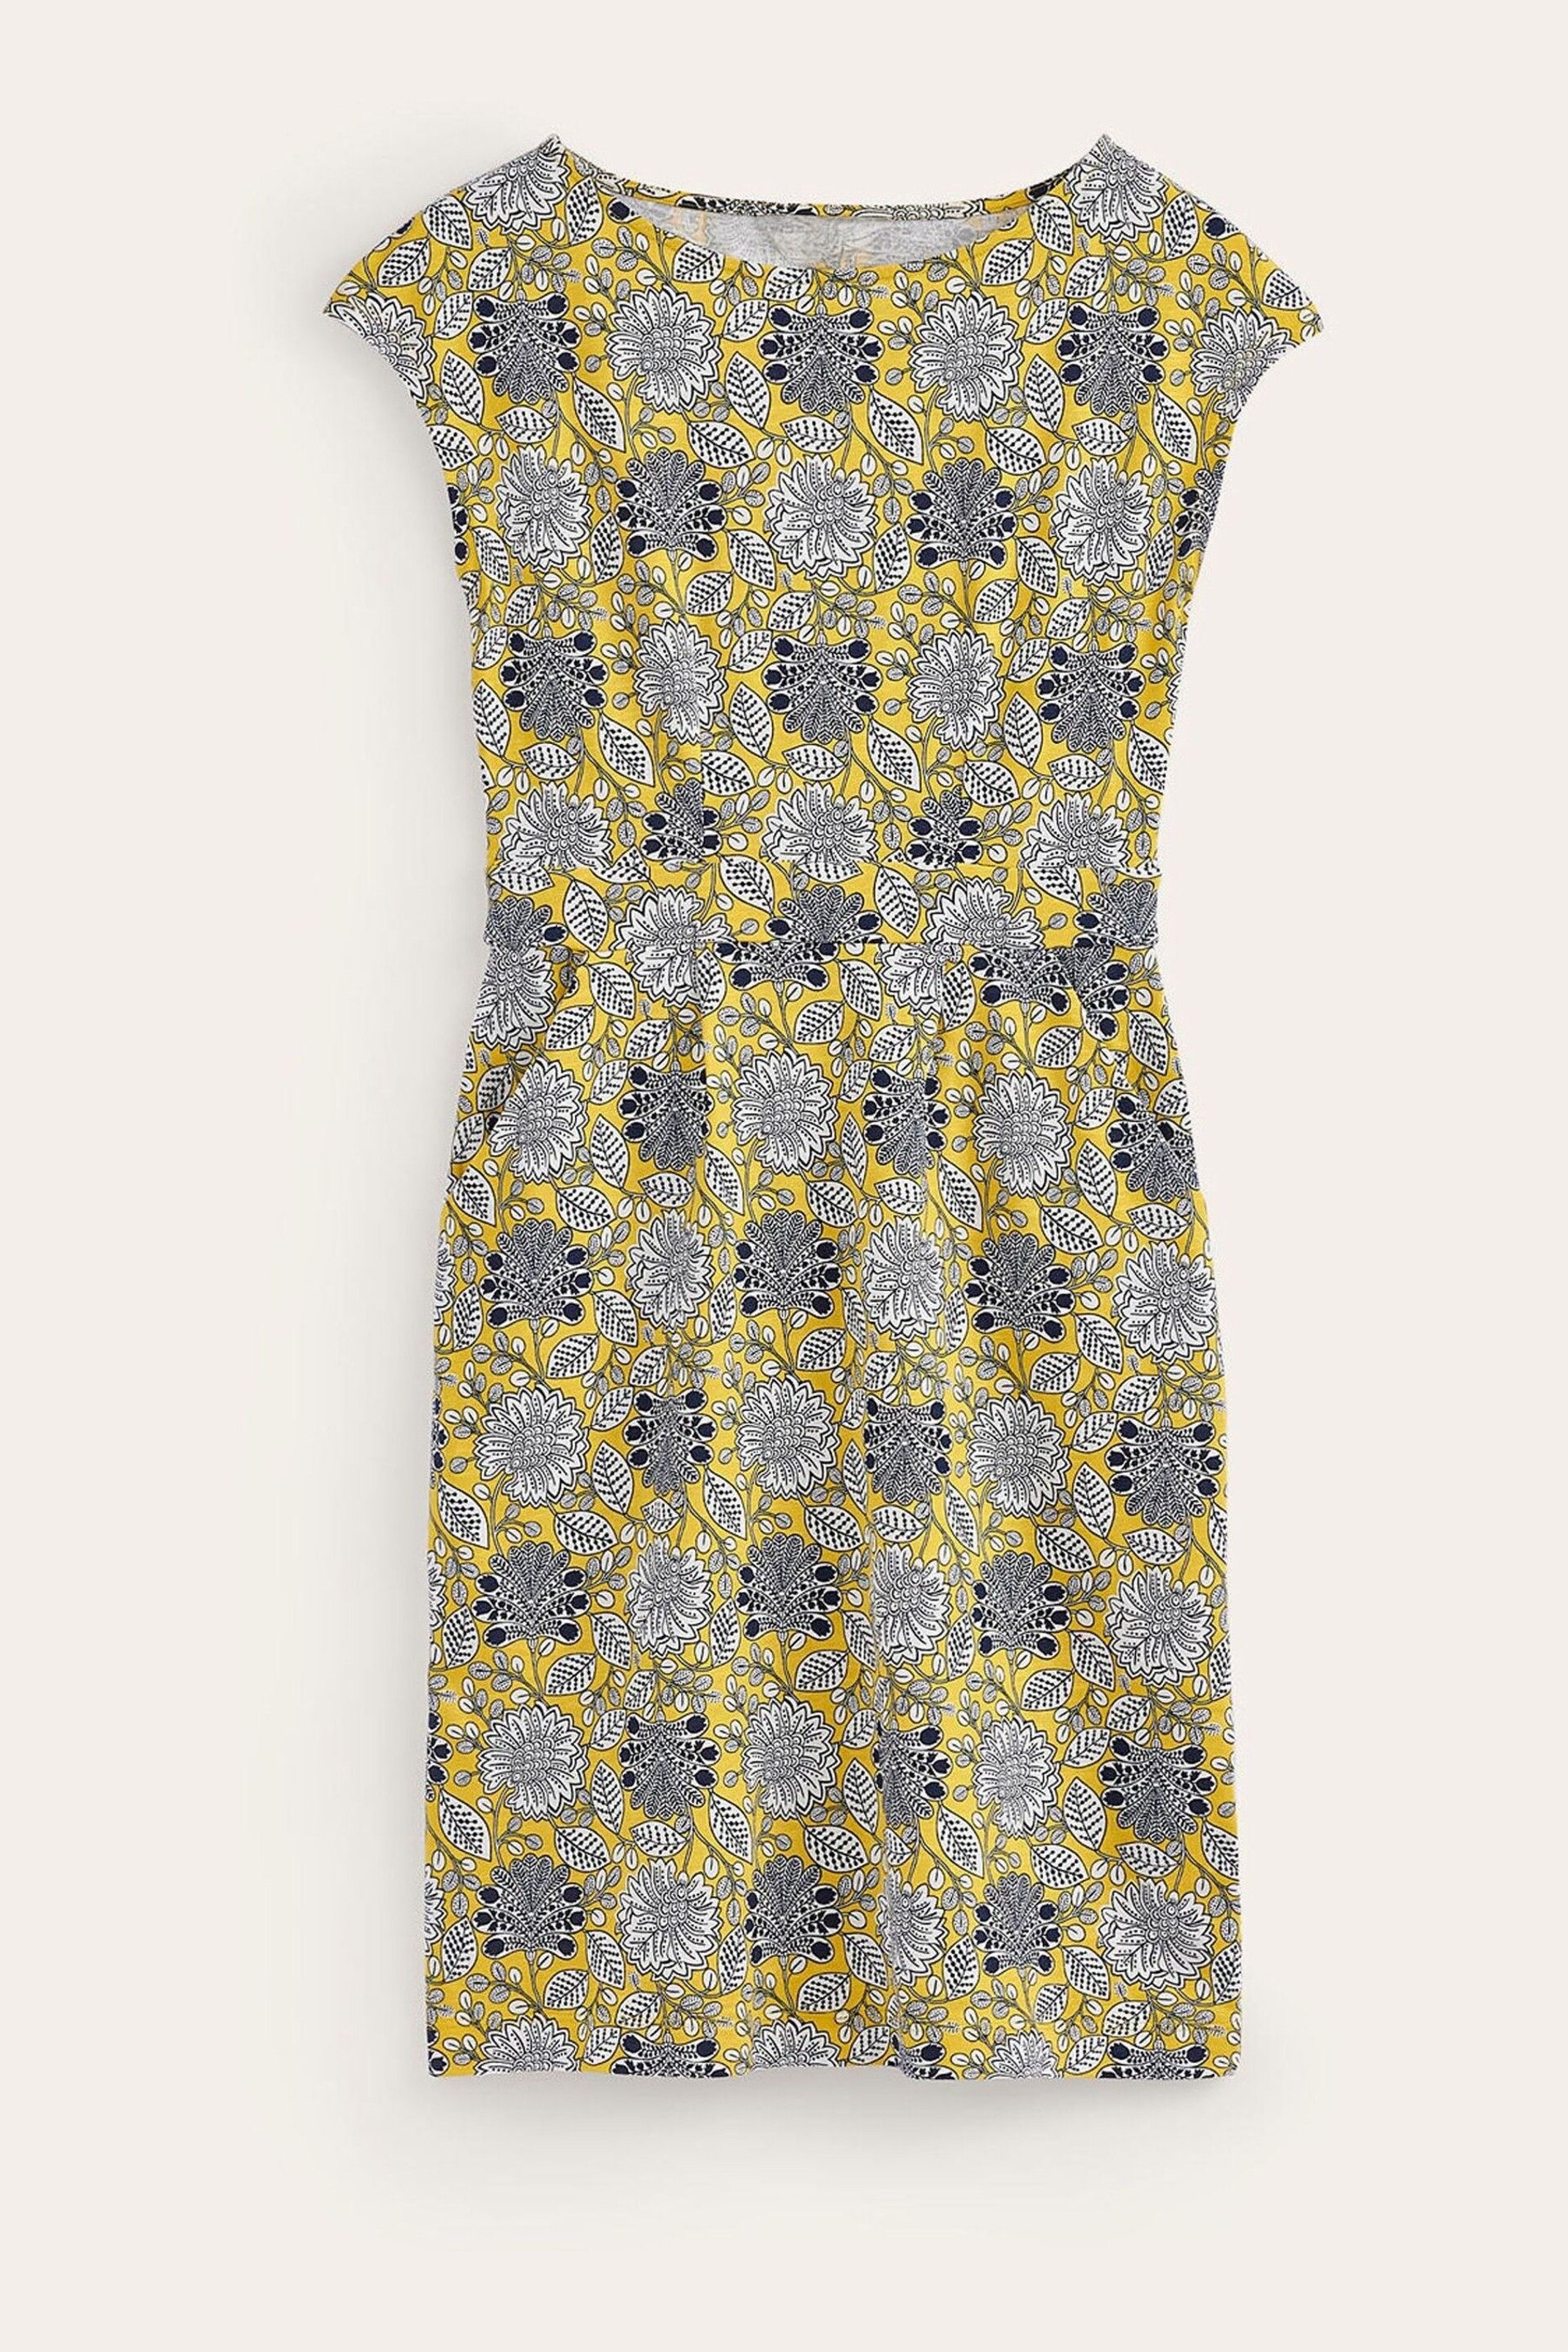 Boden Yellow Petite Florrie Jersey Dress - Image 5 of 5